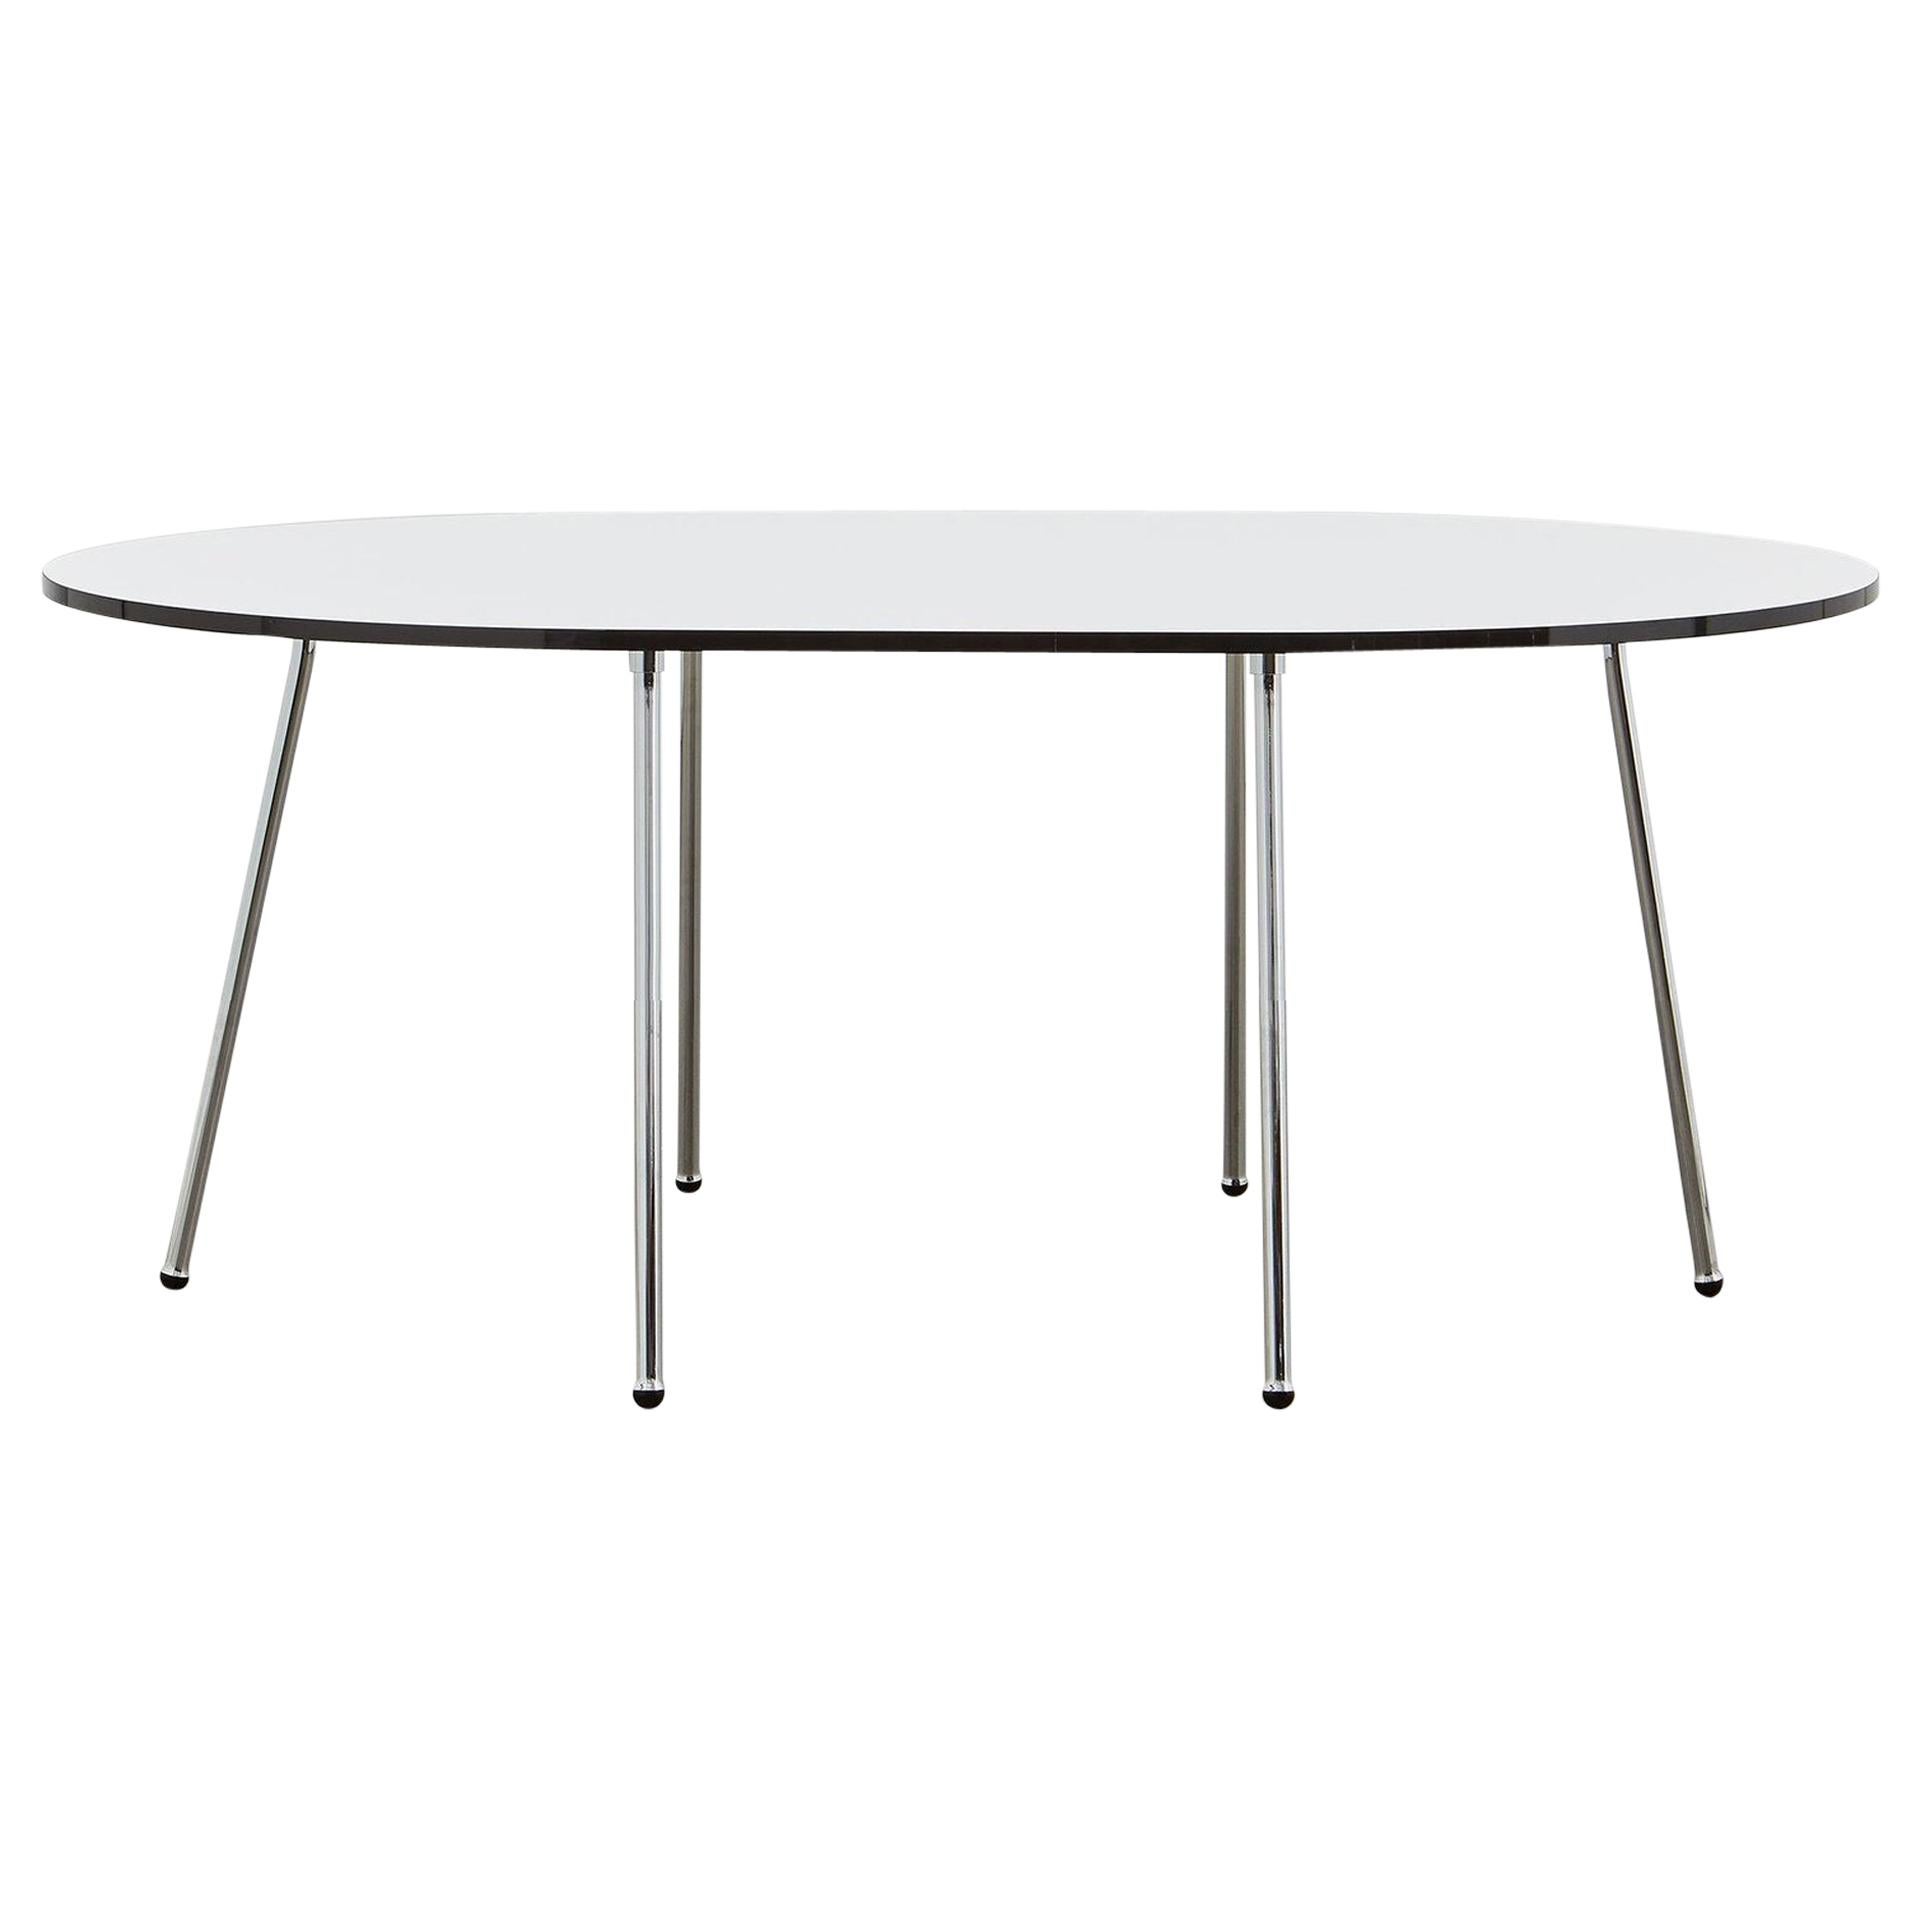 PH Dining Table, 1270x1820mm, chrome, laminated plate with black abs edge